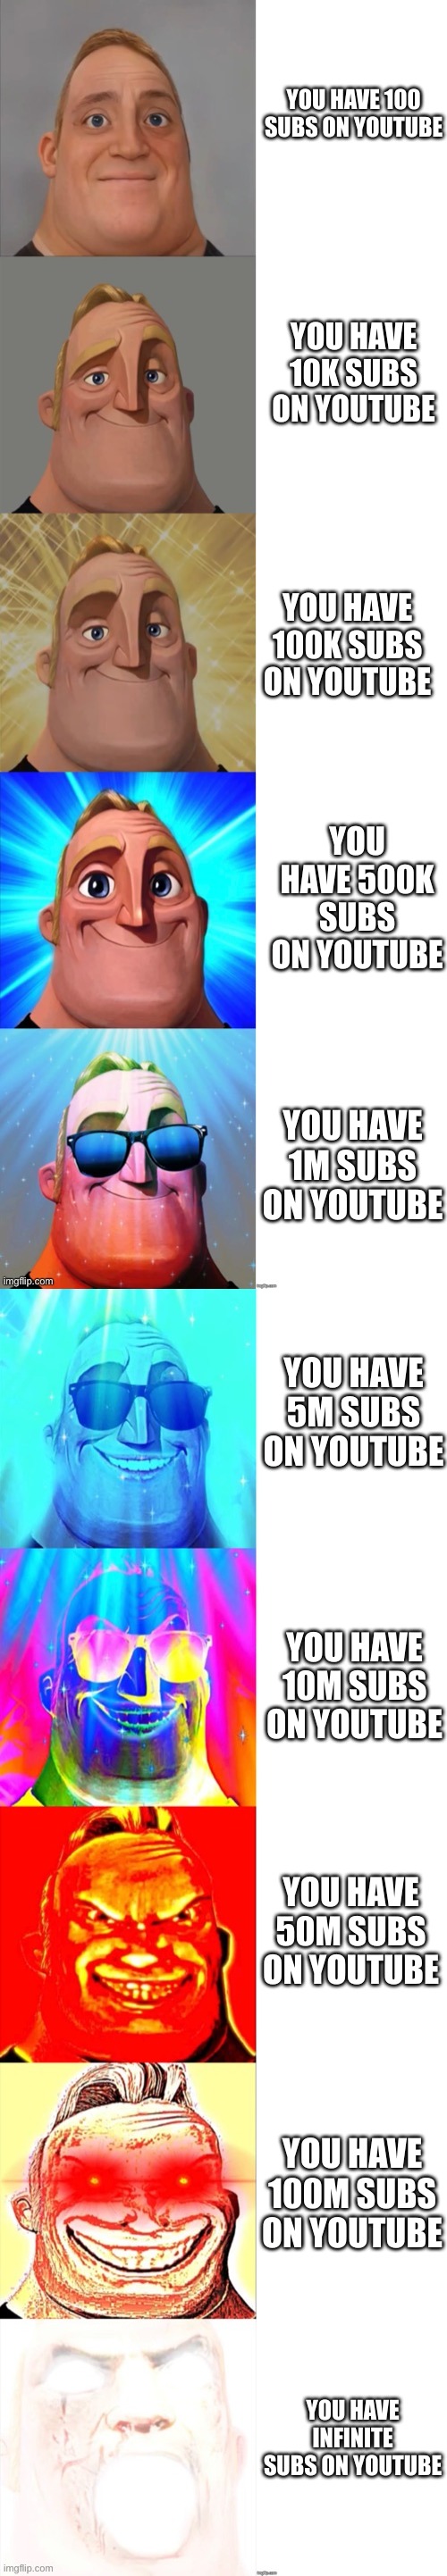 YouTubers be like | YOU HAVE 100 SUBS ON YOUTUBE; YOU HAVE 10K SUBS ON YOUTUBE; YOU HAVE 100K SUBS ON YOUTUBE; YOU HAVE 500K SUBS ON YOUTUBE; YOU HAVE 1M SUBS ON YOUTUBE; YOU HAVE 5M SUBS ON YOUTUBE; YOU HAVE 10M SUBS ON YOUTUBE; YOU HAVE 50M SUBS ON YOUTUBE; YOU HAVE 100M SUBS ON YOUTUBE; YOU HAVE INFINITE SUBS ON YOUTUBE | image tagged in mr incredible becoming canny | made w/ Imgflip meme maker